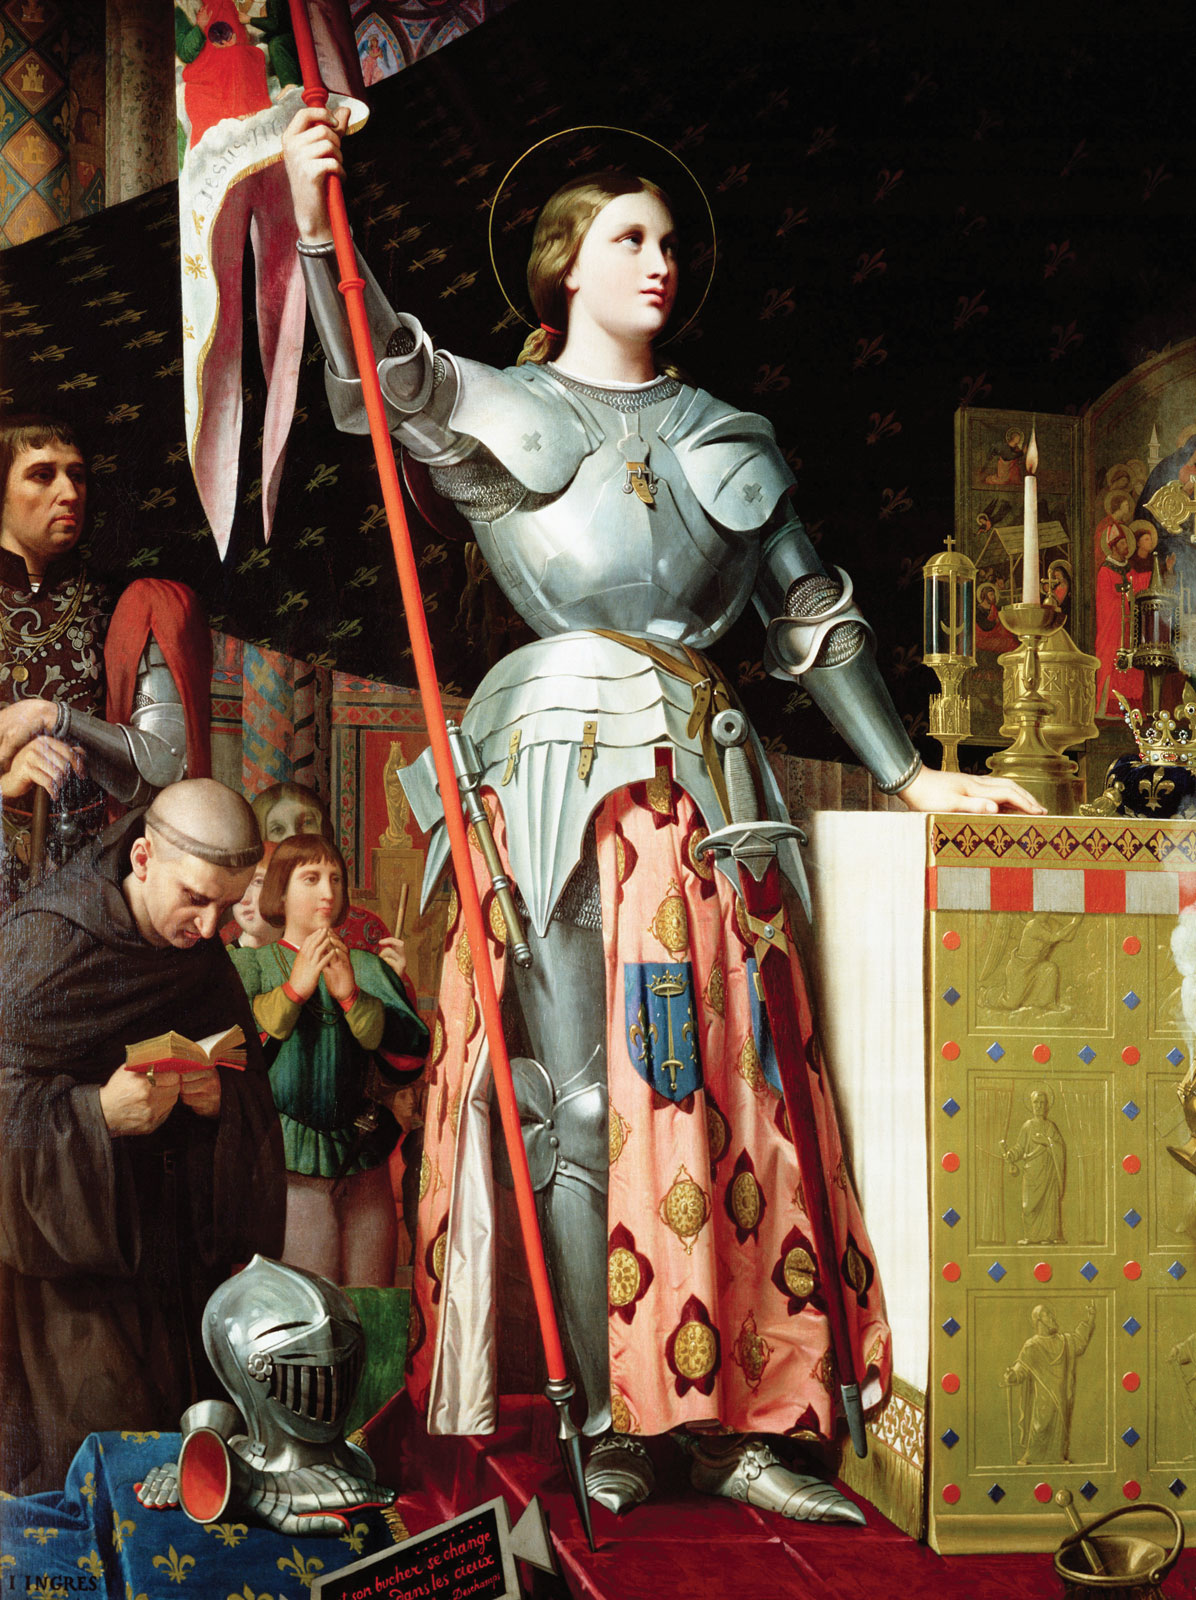 Joan of Arc at the Coronation of Charles VII (Jeanne d’Arc au sacre du roi Charles VII) is an 1854 painting by Jean Auguste Dominique Ingres. It is now in the Louvre Museum in Paris. The work merges the style of Ingres' teacher Jacques-Louis David with that of the troubador style. He began with a nude model, adding the clothes and armor. The painting was first commissioned by the director of the Academie des Belles Artes in Orléans to commemorate Joan of Arc. It shows her at the coronation of Charles VII of France in Reims Cathedral, victorious and looking up to heaven, which she felt had given France the victory. To her right are three pages, the monk Jean Paquerel, and a servant. The servant is a self-portrait of the artist. The scene is marked by ambient light, sumptuous objects and rich colors.